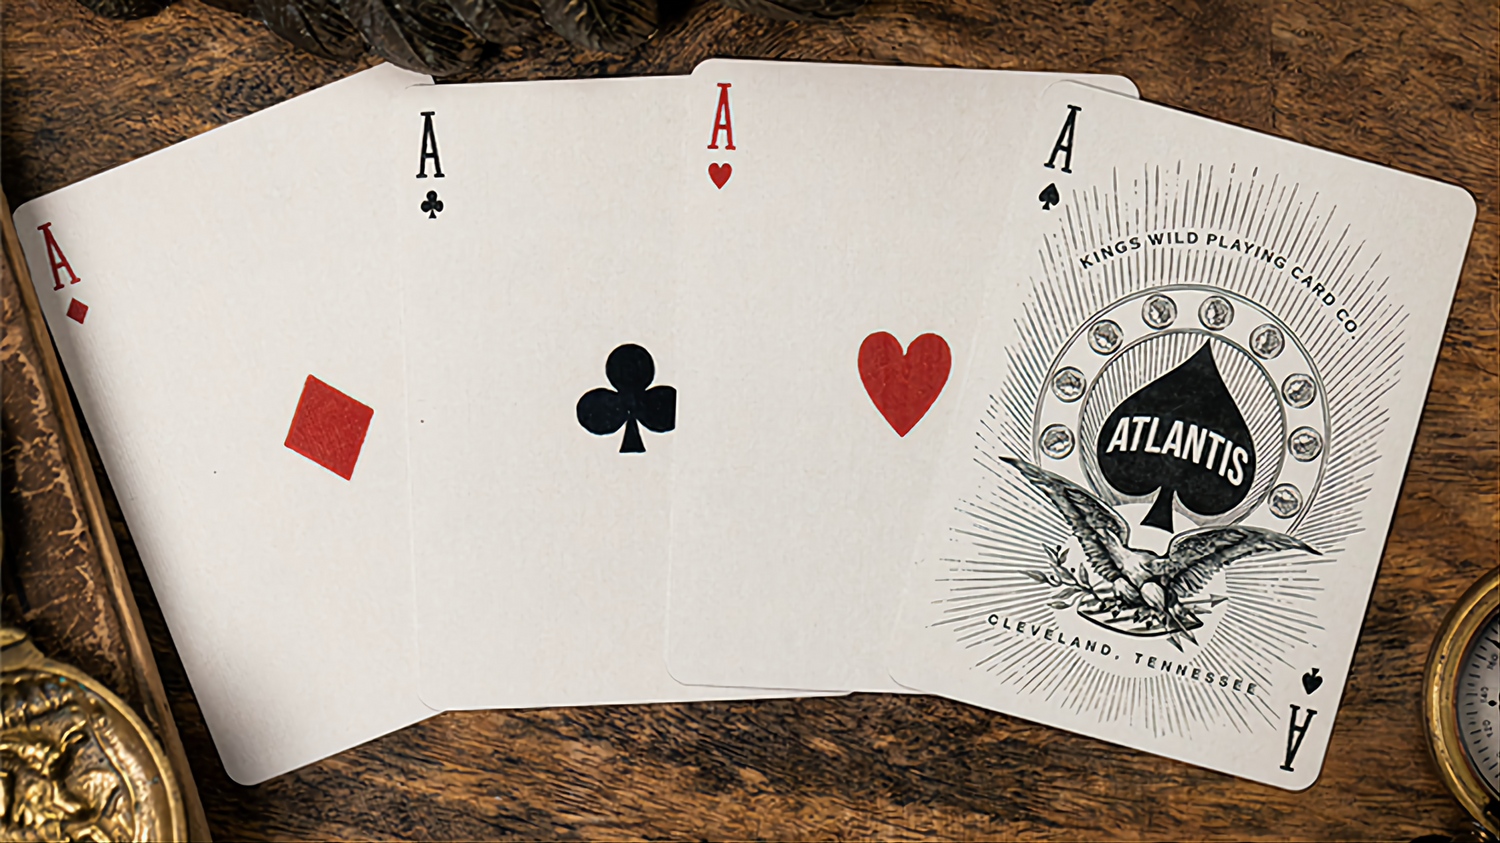 Atlantis by Kings Wild Project : Playing Cards, Poker, Magic, Cardistry,singapore